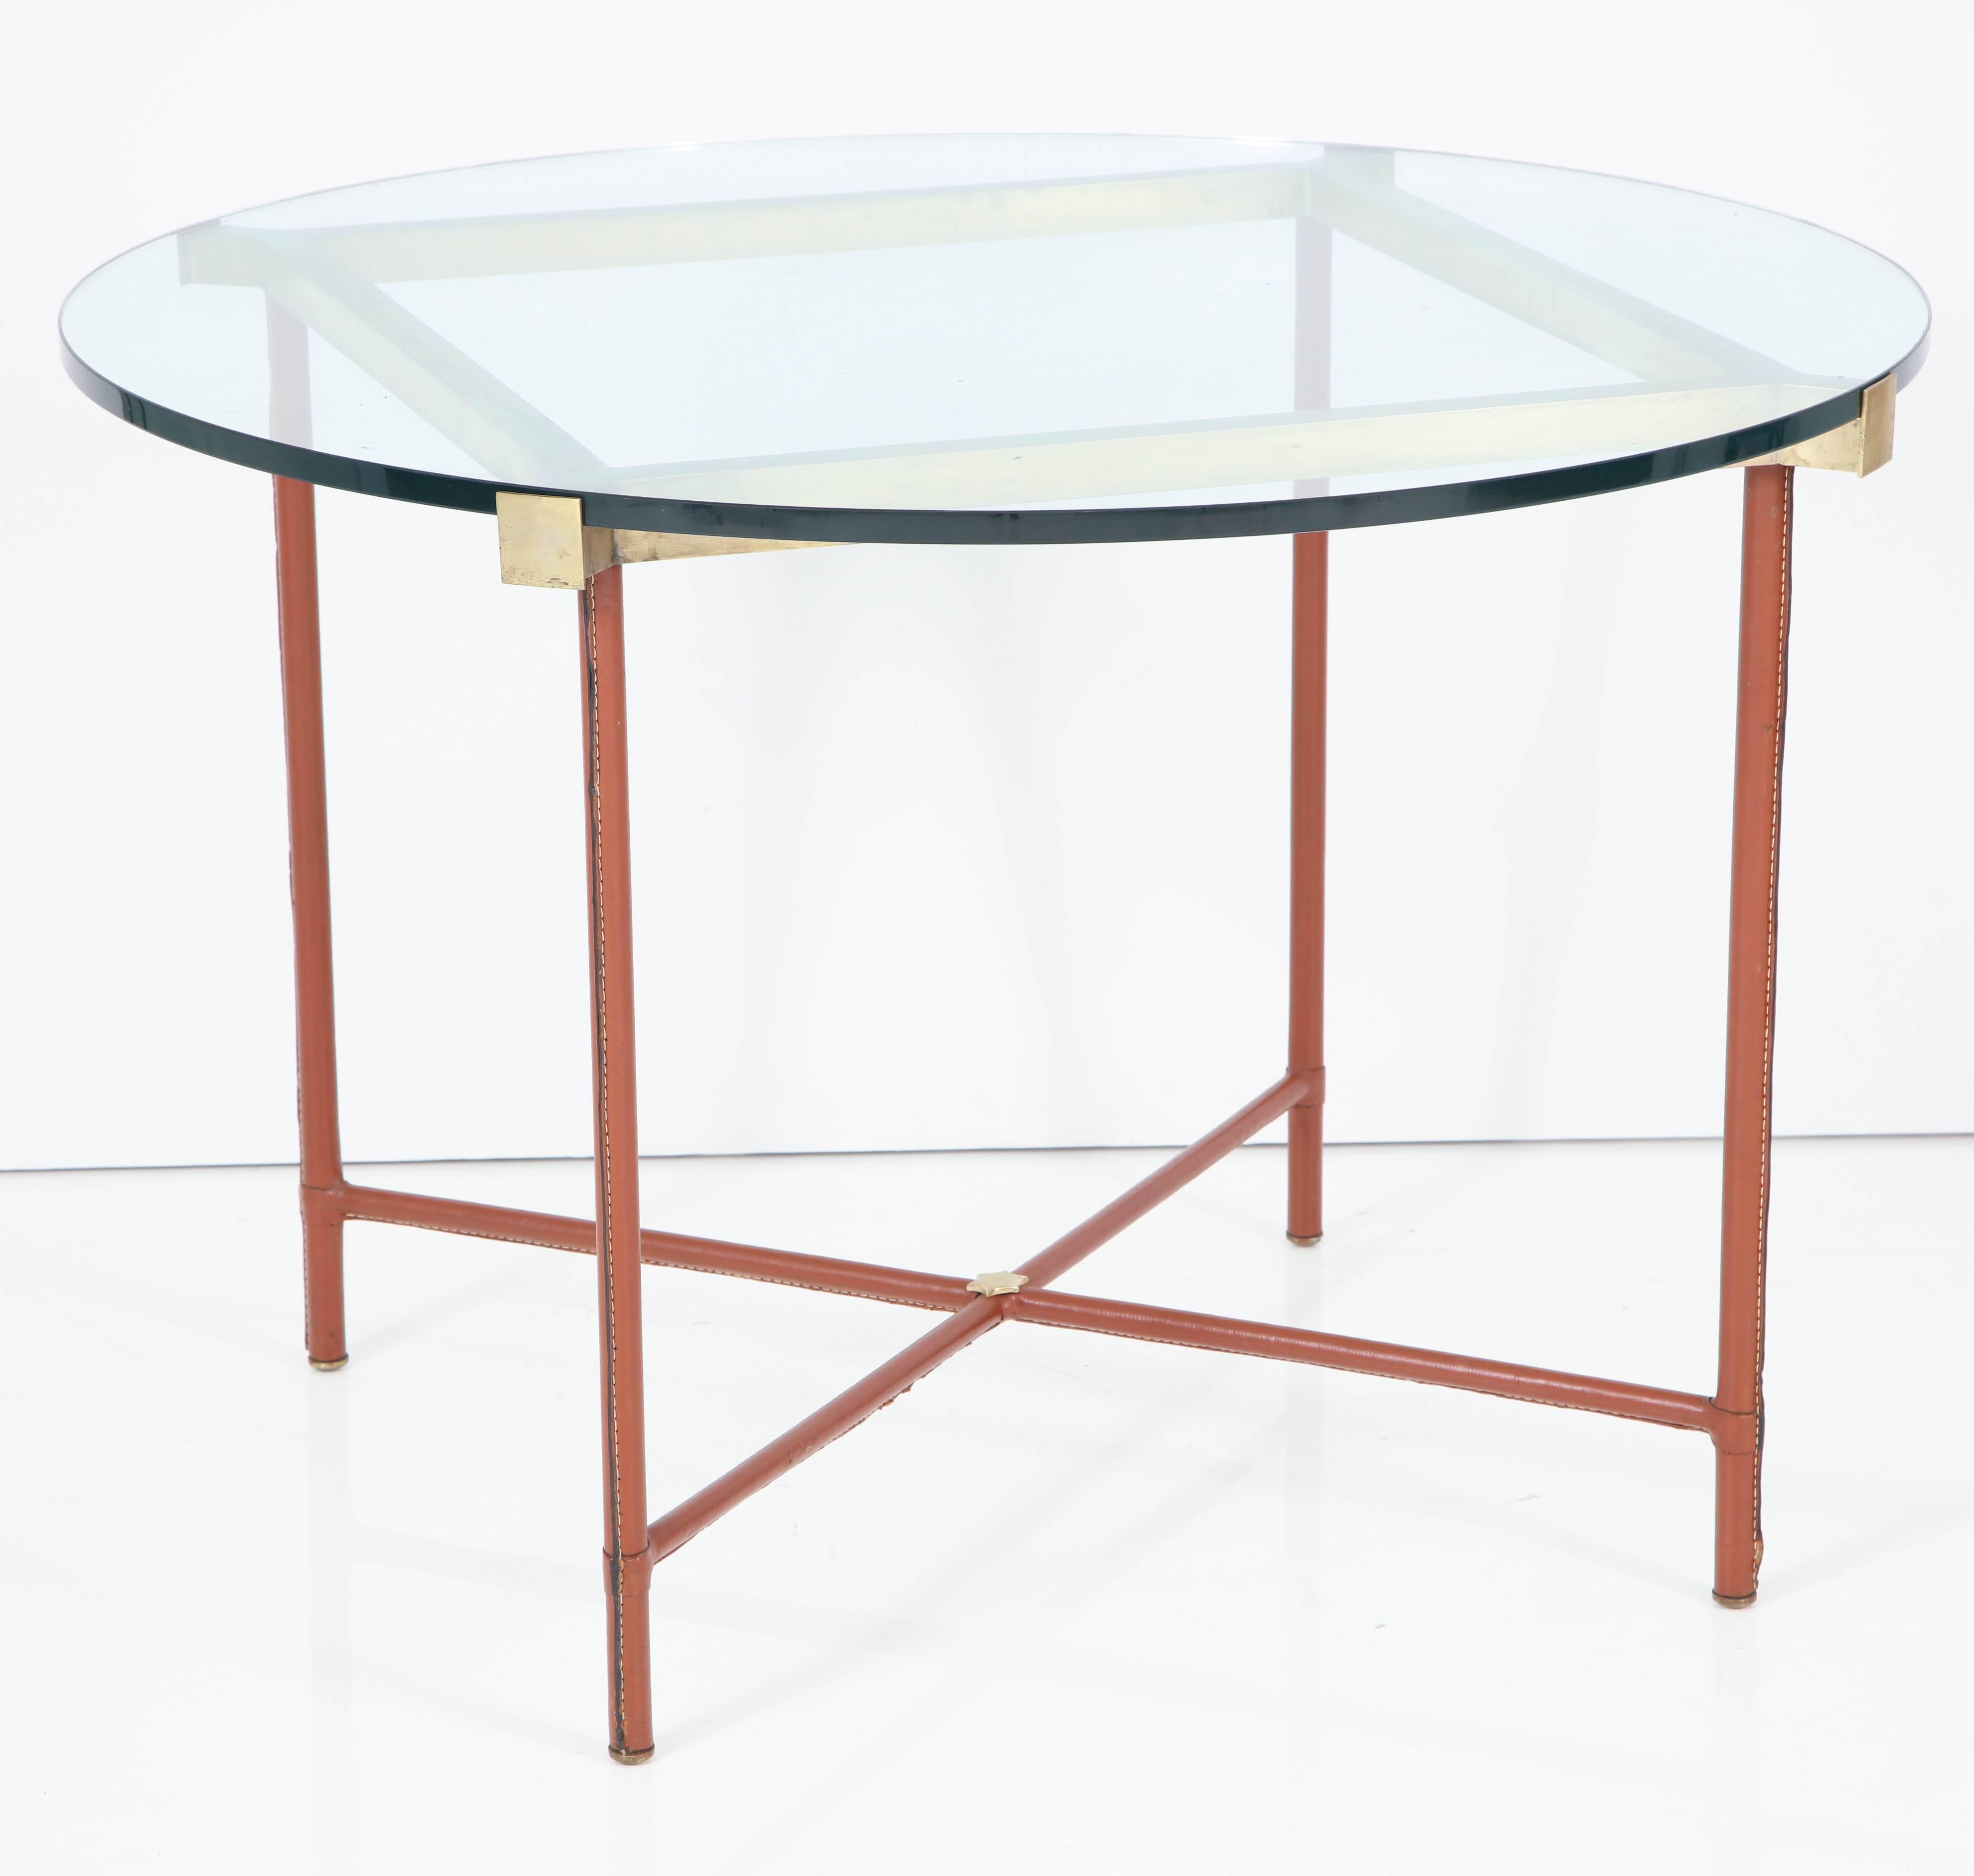 Elegant centre table by Jacques Adnet, metal frame covered in hand-stitched leather, brass hardware and frame. Glass top.